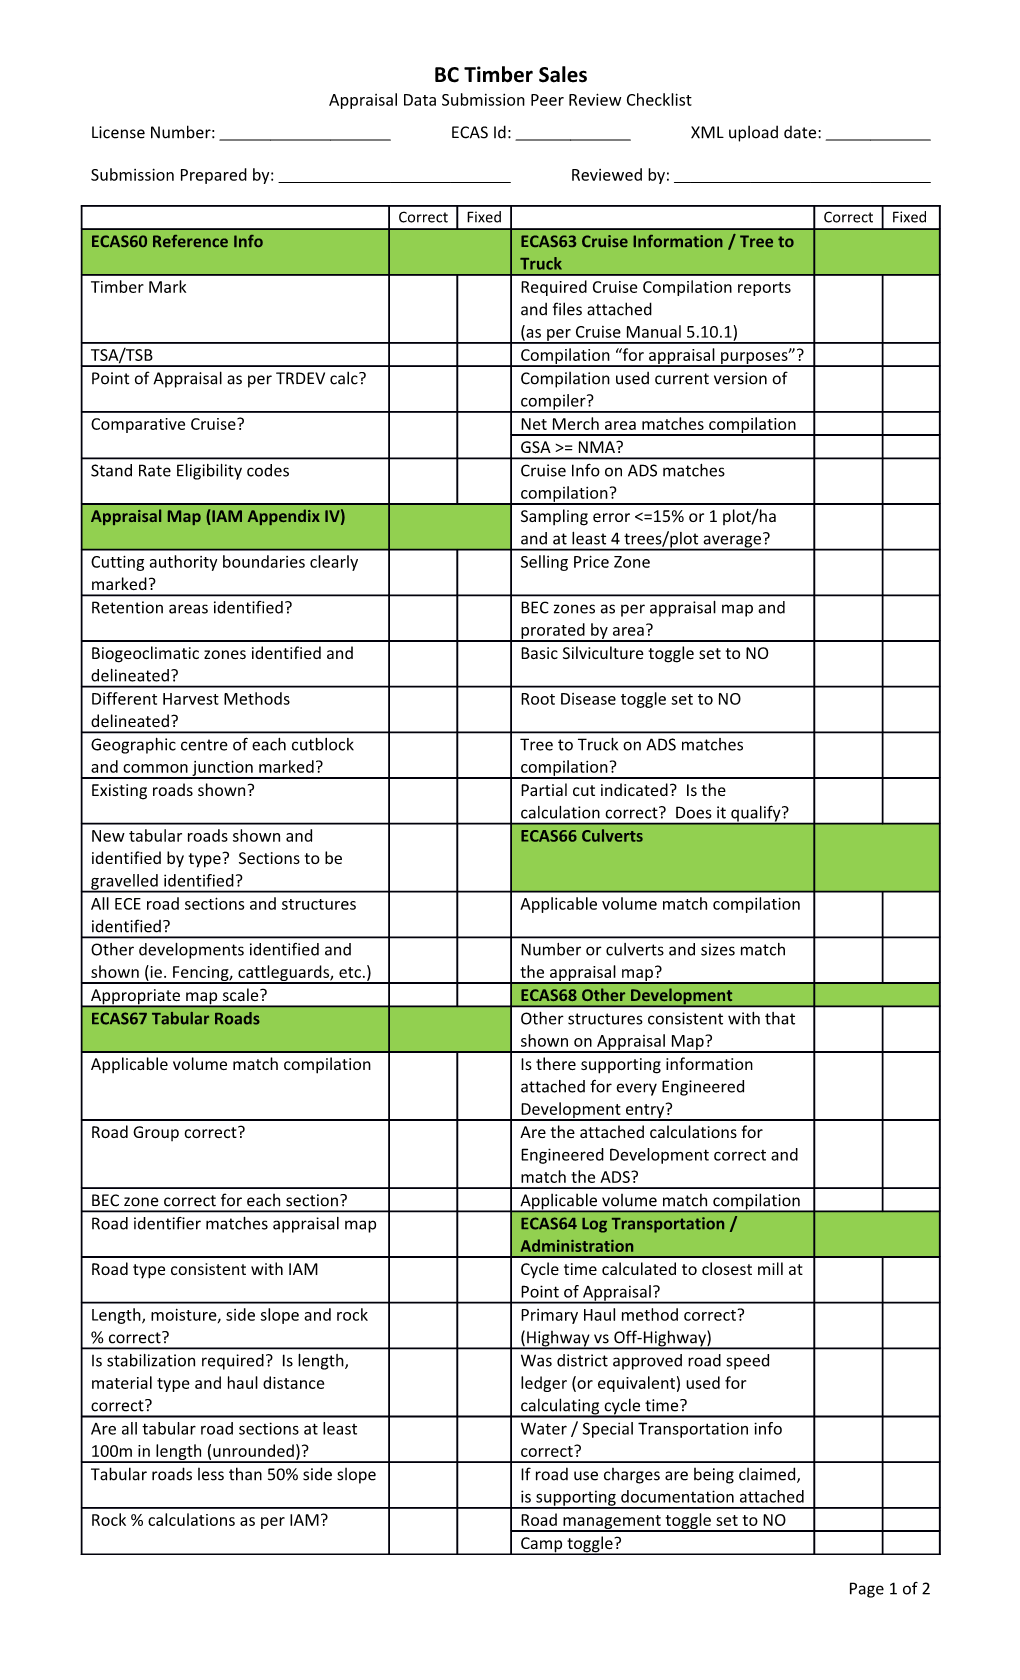 Appraisal Data Submission Peer Review Checklist